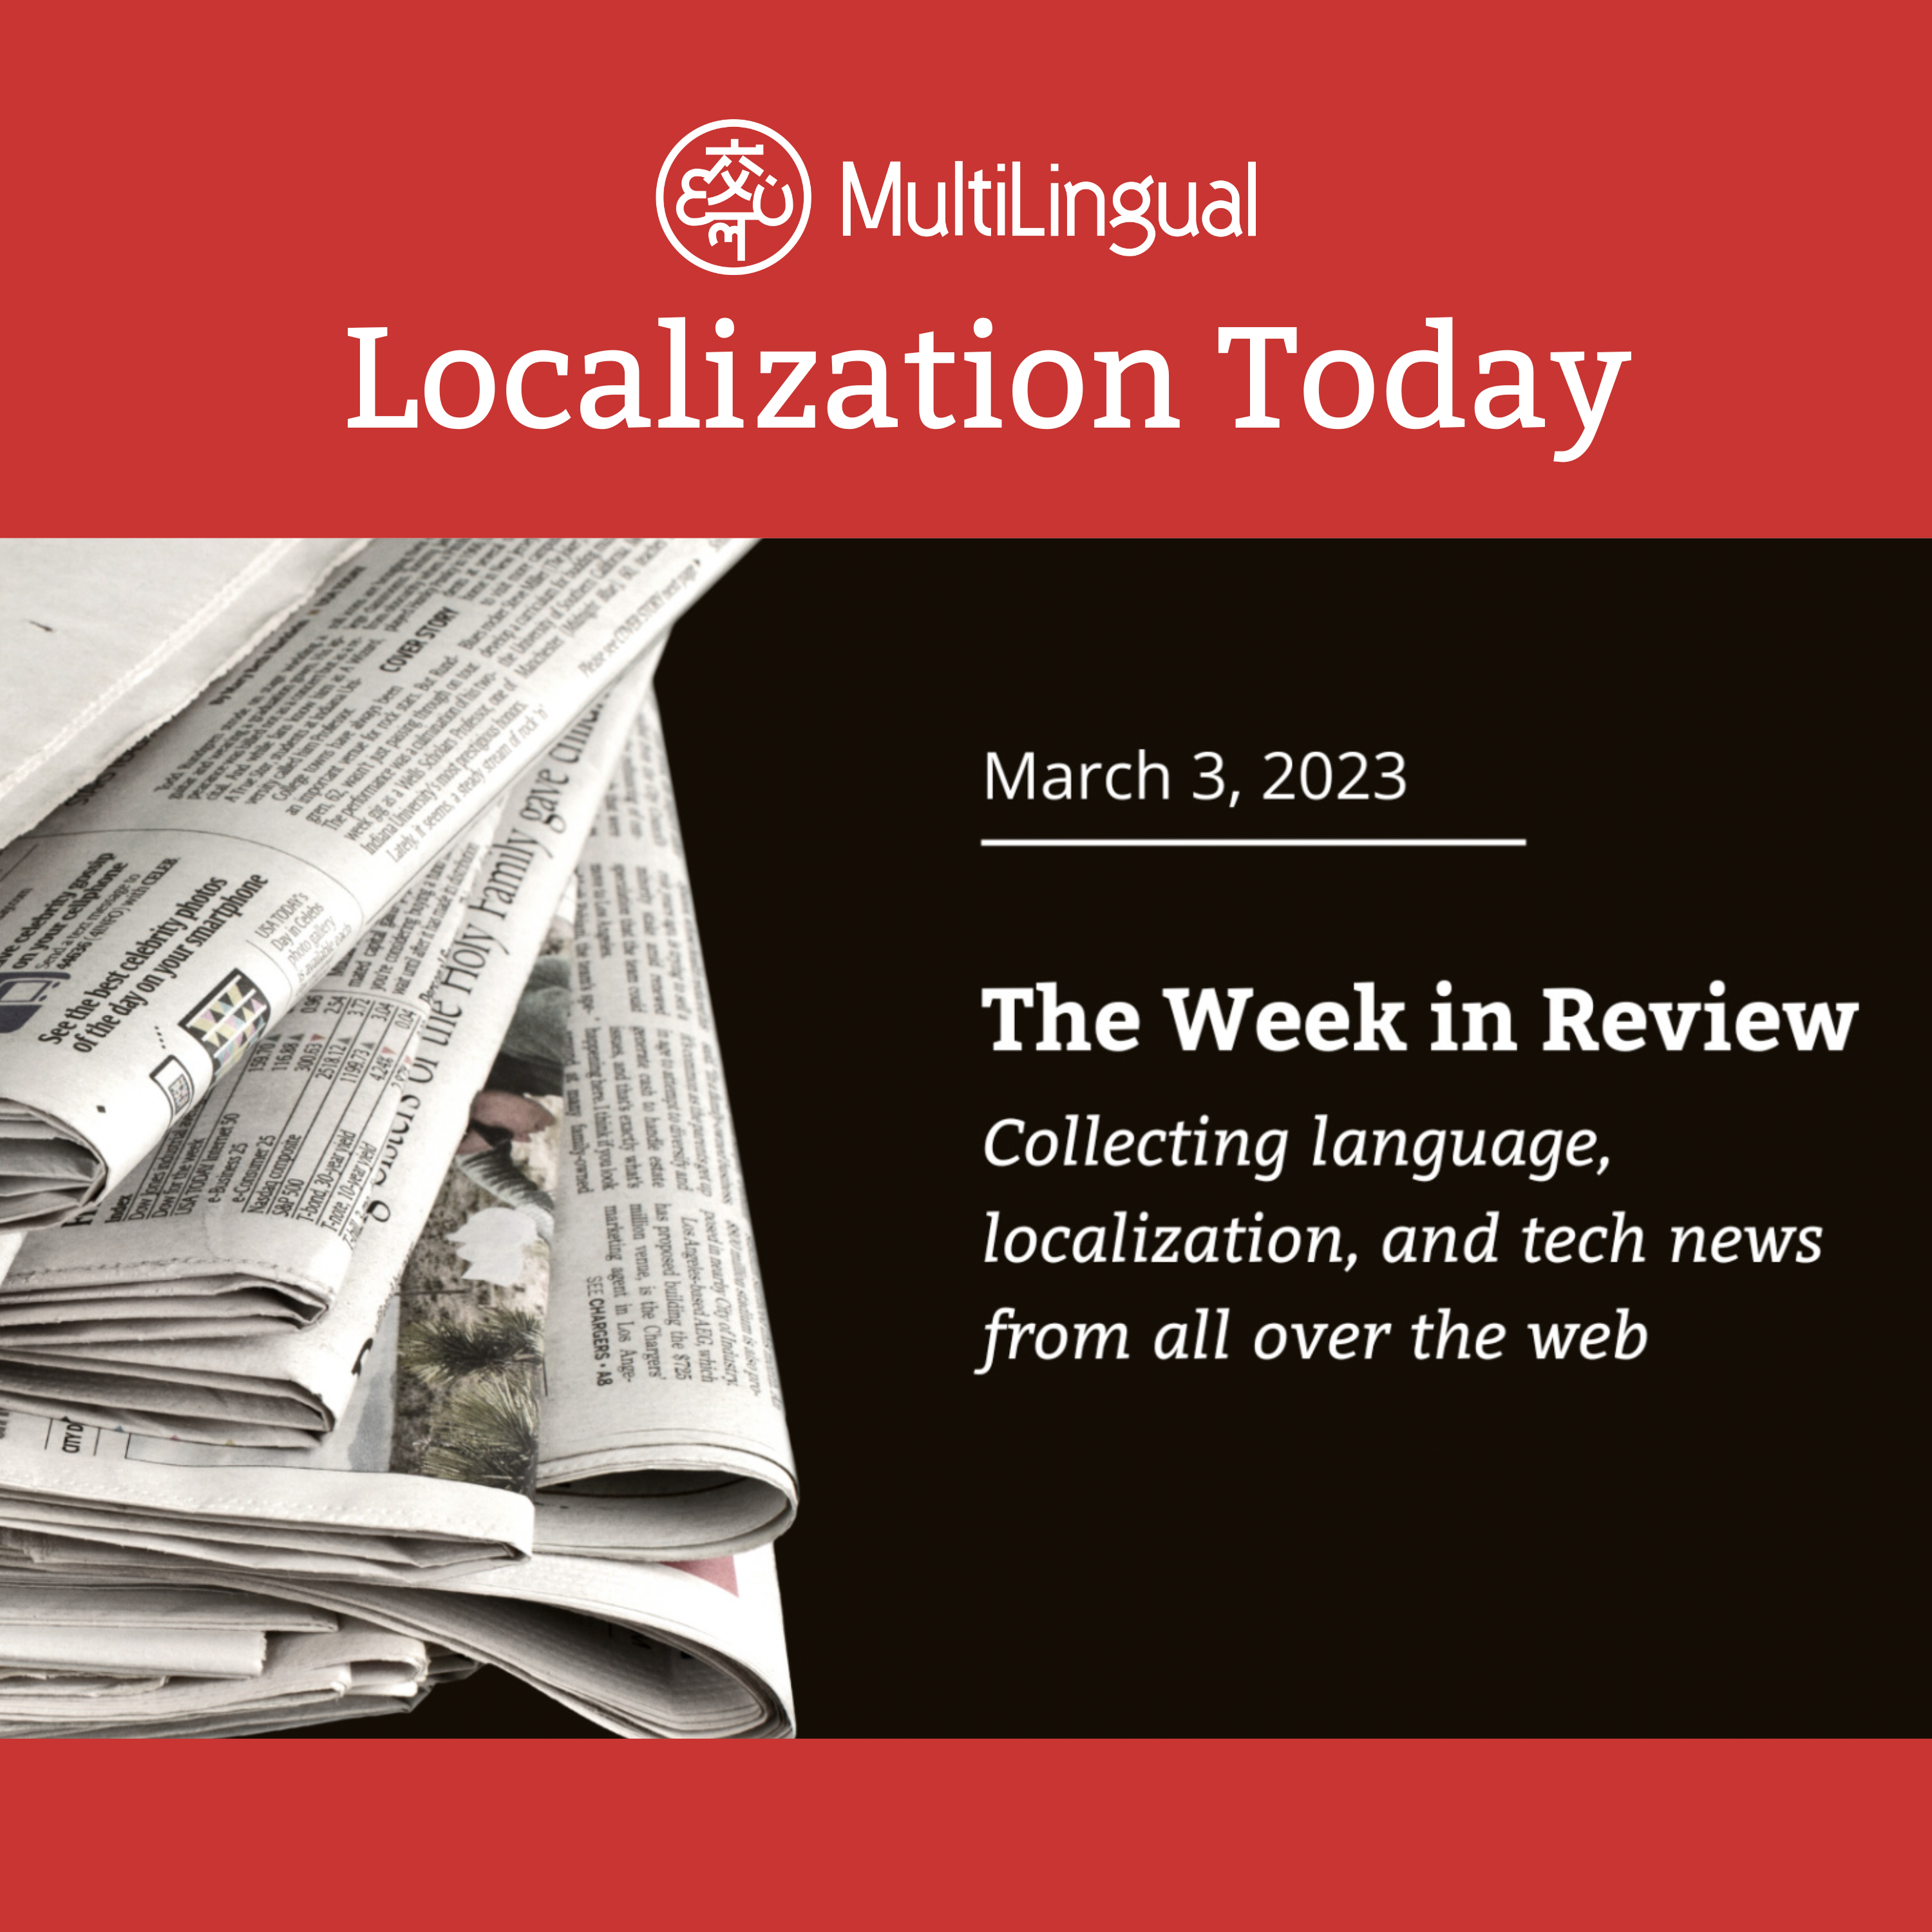 The Week in Review: March 3, 2023